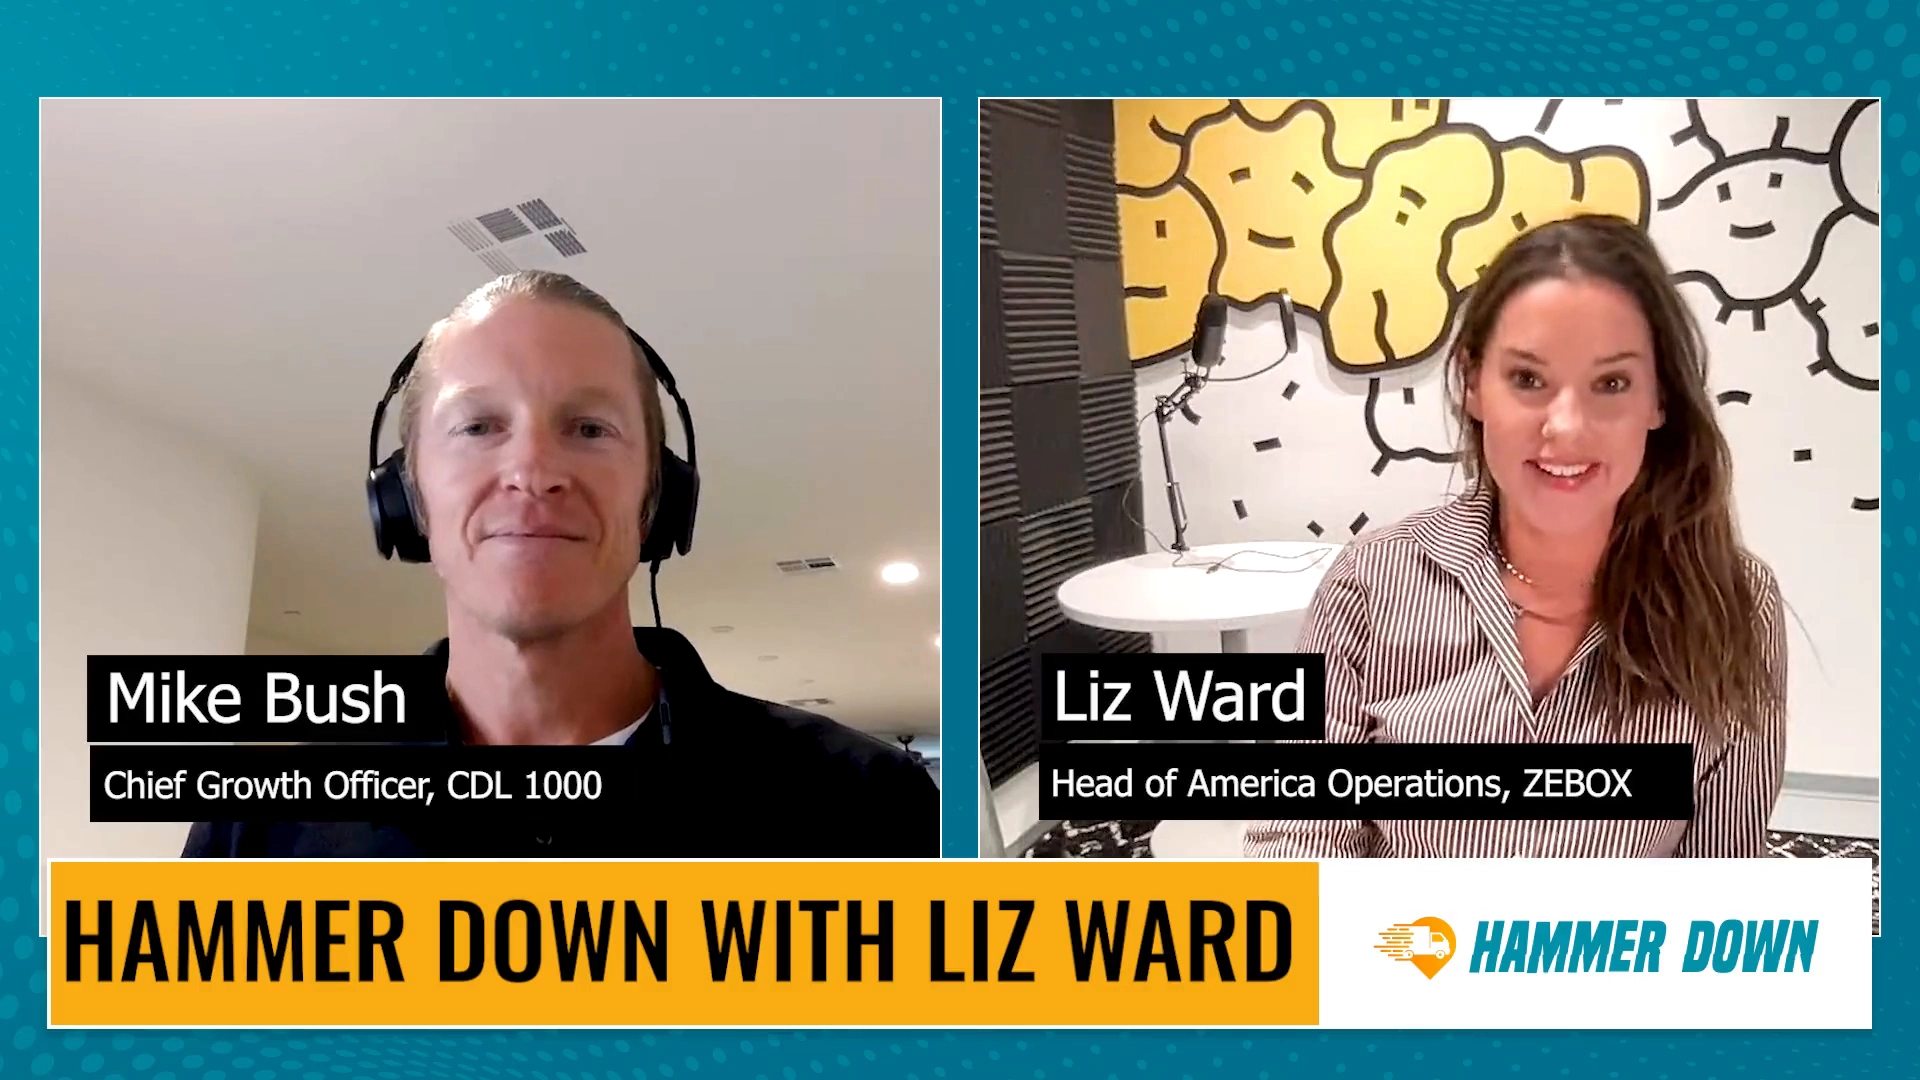 ZEBOX’s Liz Ward Sees a Supply Chain Future Powered by Innovation and Entrepreneurship